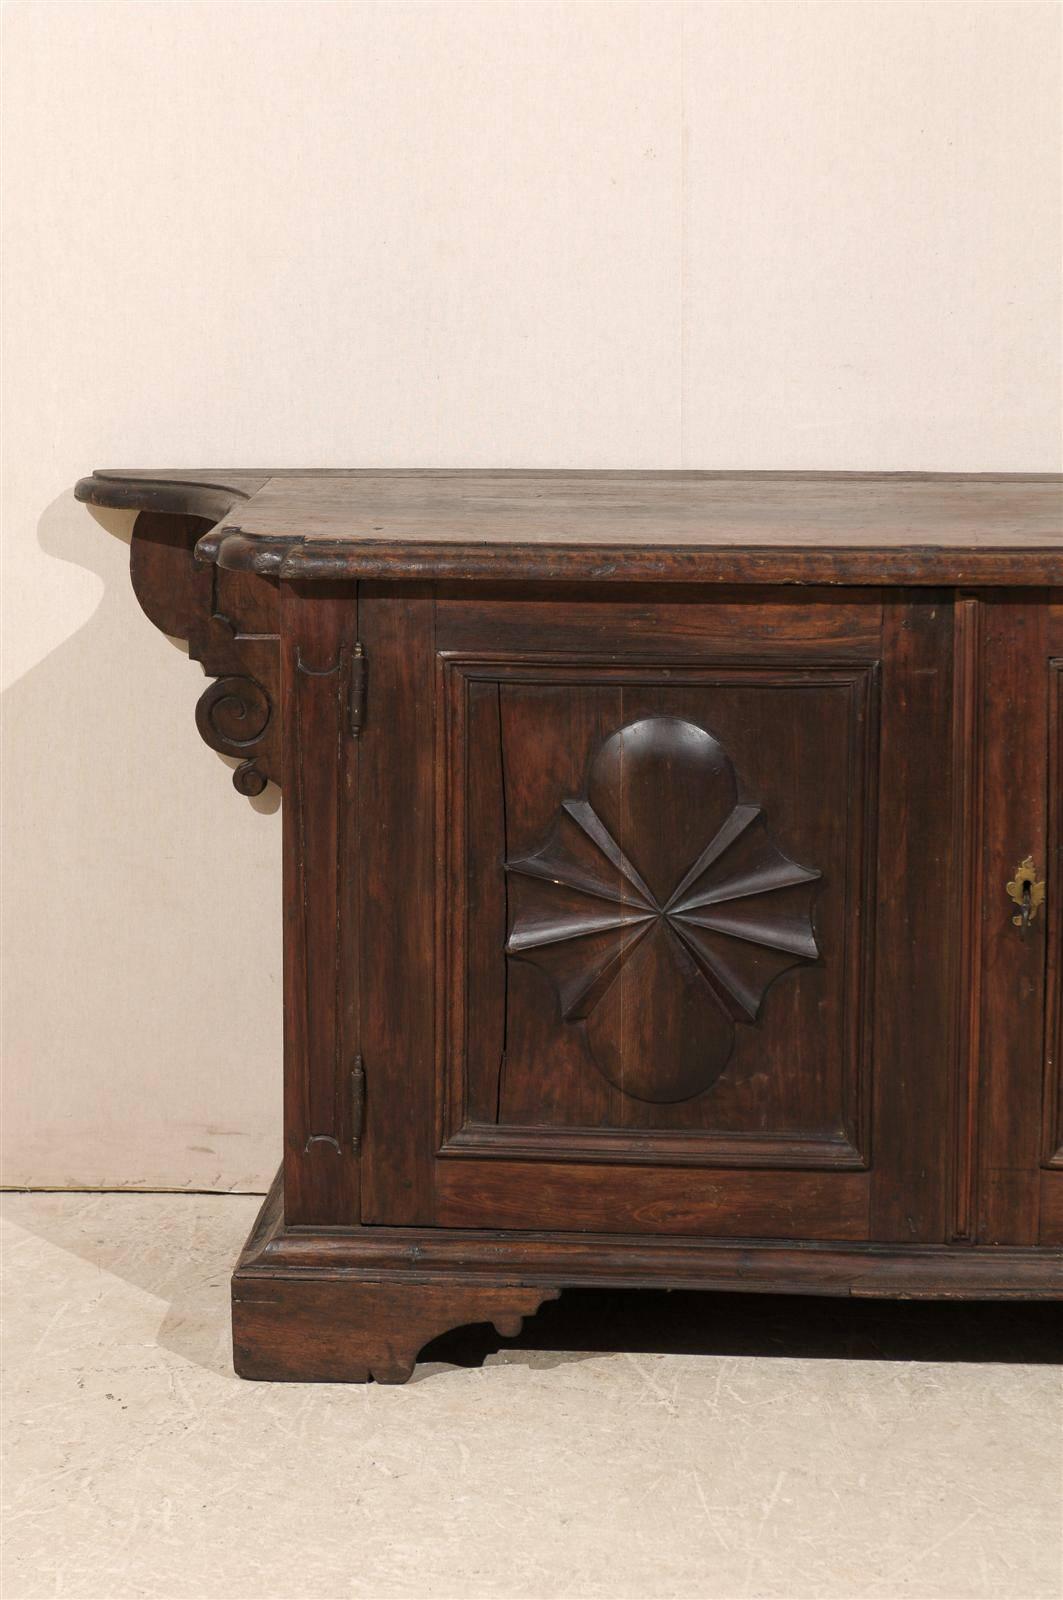 Carved 18th Century Italian Rich Walnut Wood Credenza with Sunburst and Volute Motifs